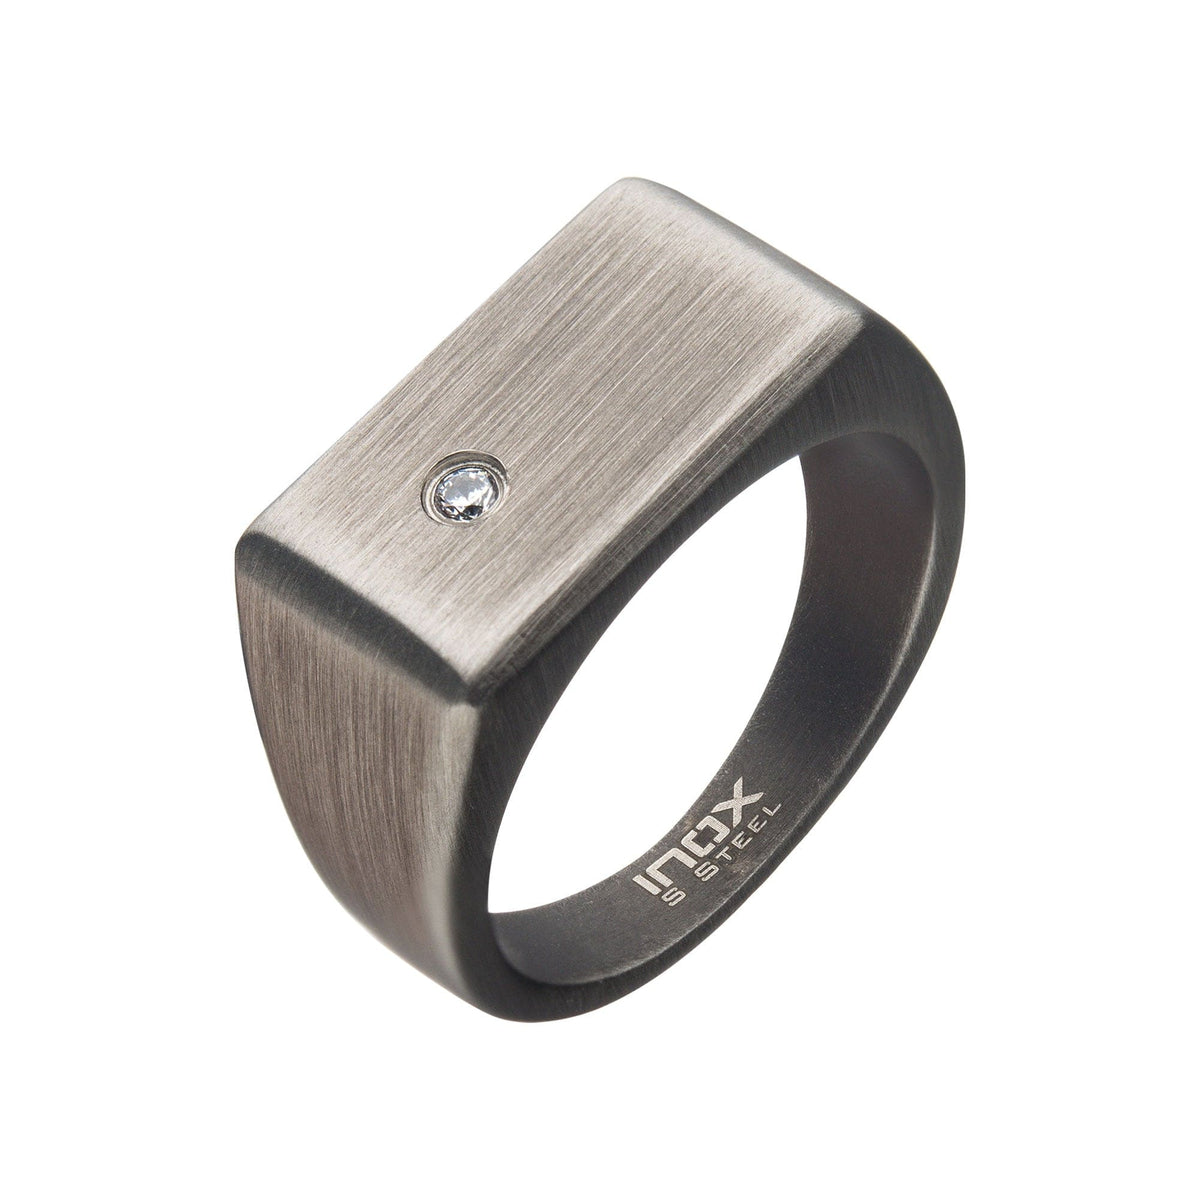 INOX JEWELRY Rings Gunmetal Stainless Steel Matte Finish CZ Engraveable Signet Ring